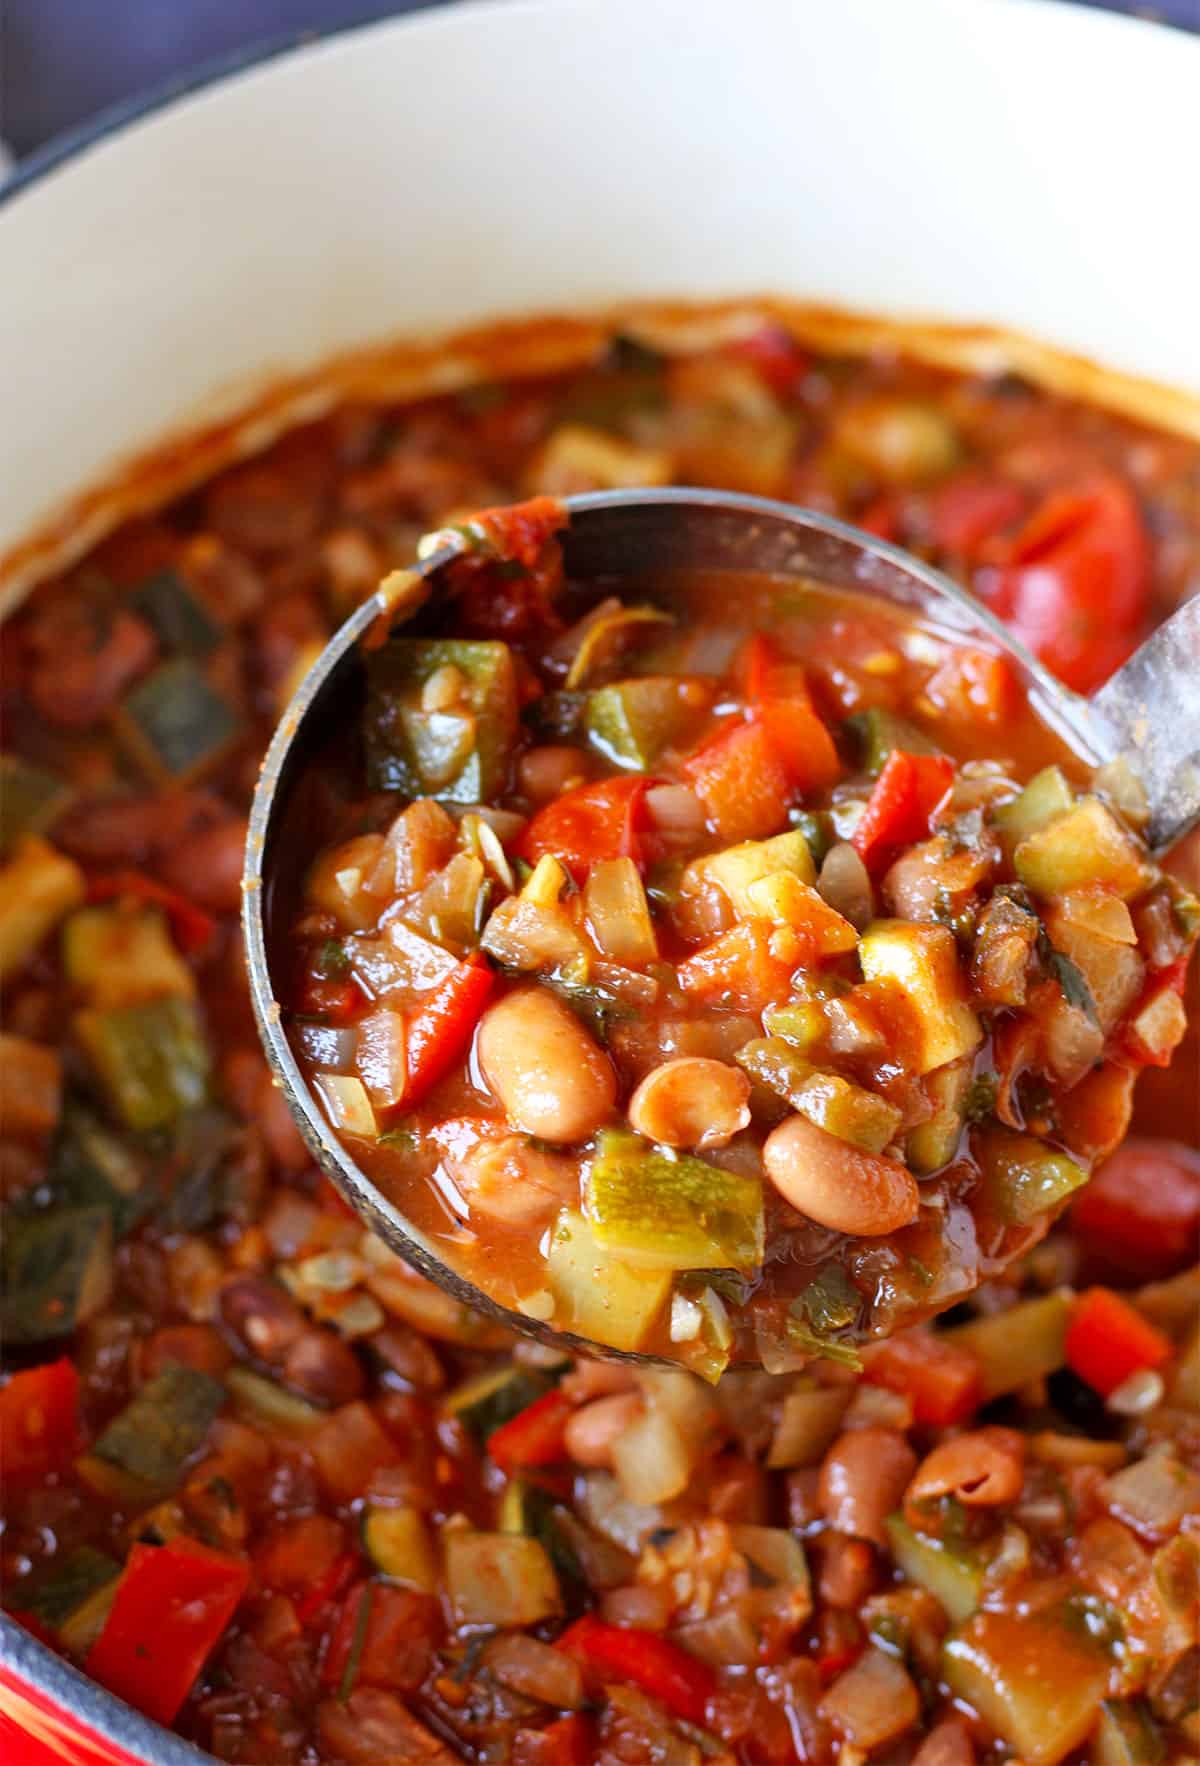 Chili with zucchini, pinto beans, tomatoes, and red pepper is ladled from a cooking pot.